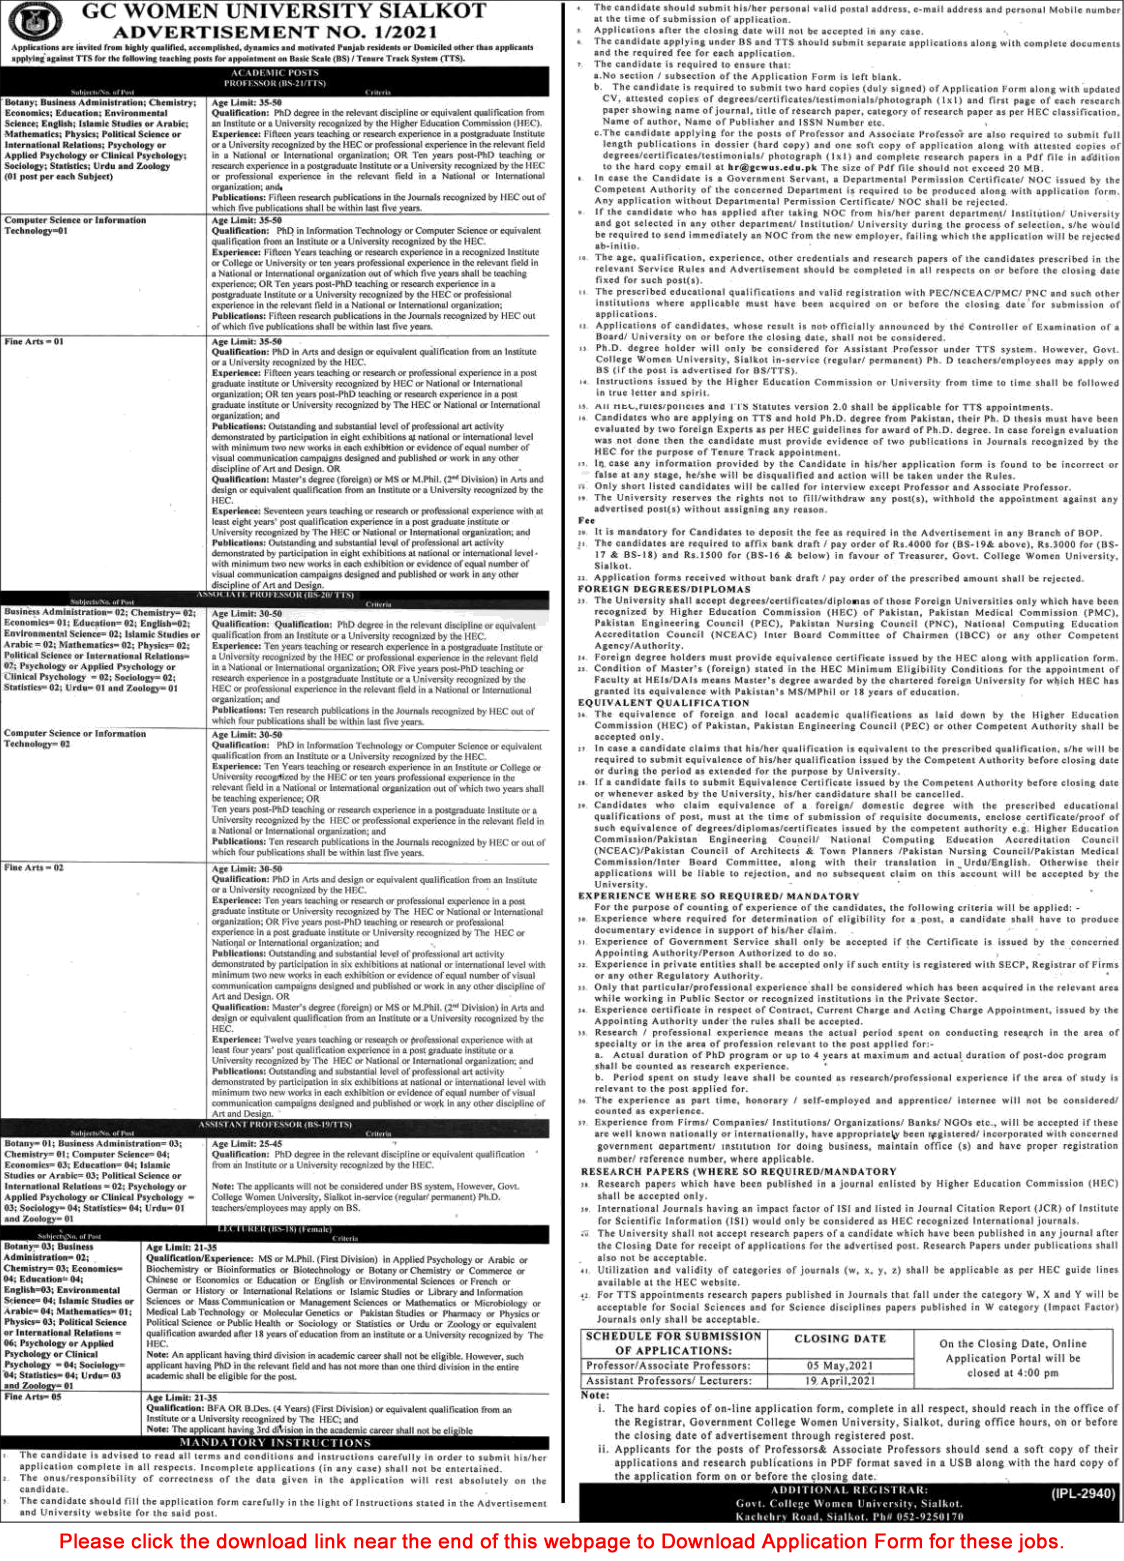 Teaching Faculty Jobs in GC Women University Sialkot 2021 March / April Application Form Latest